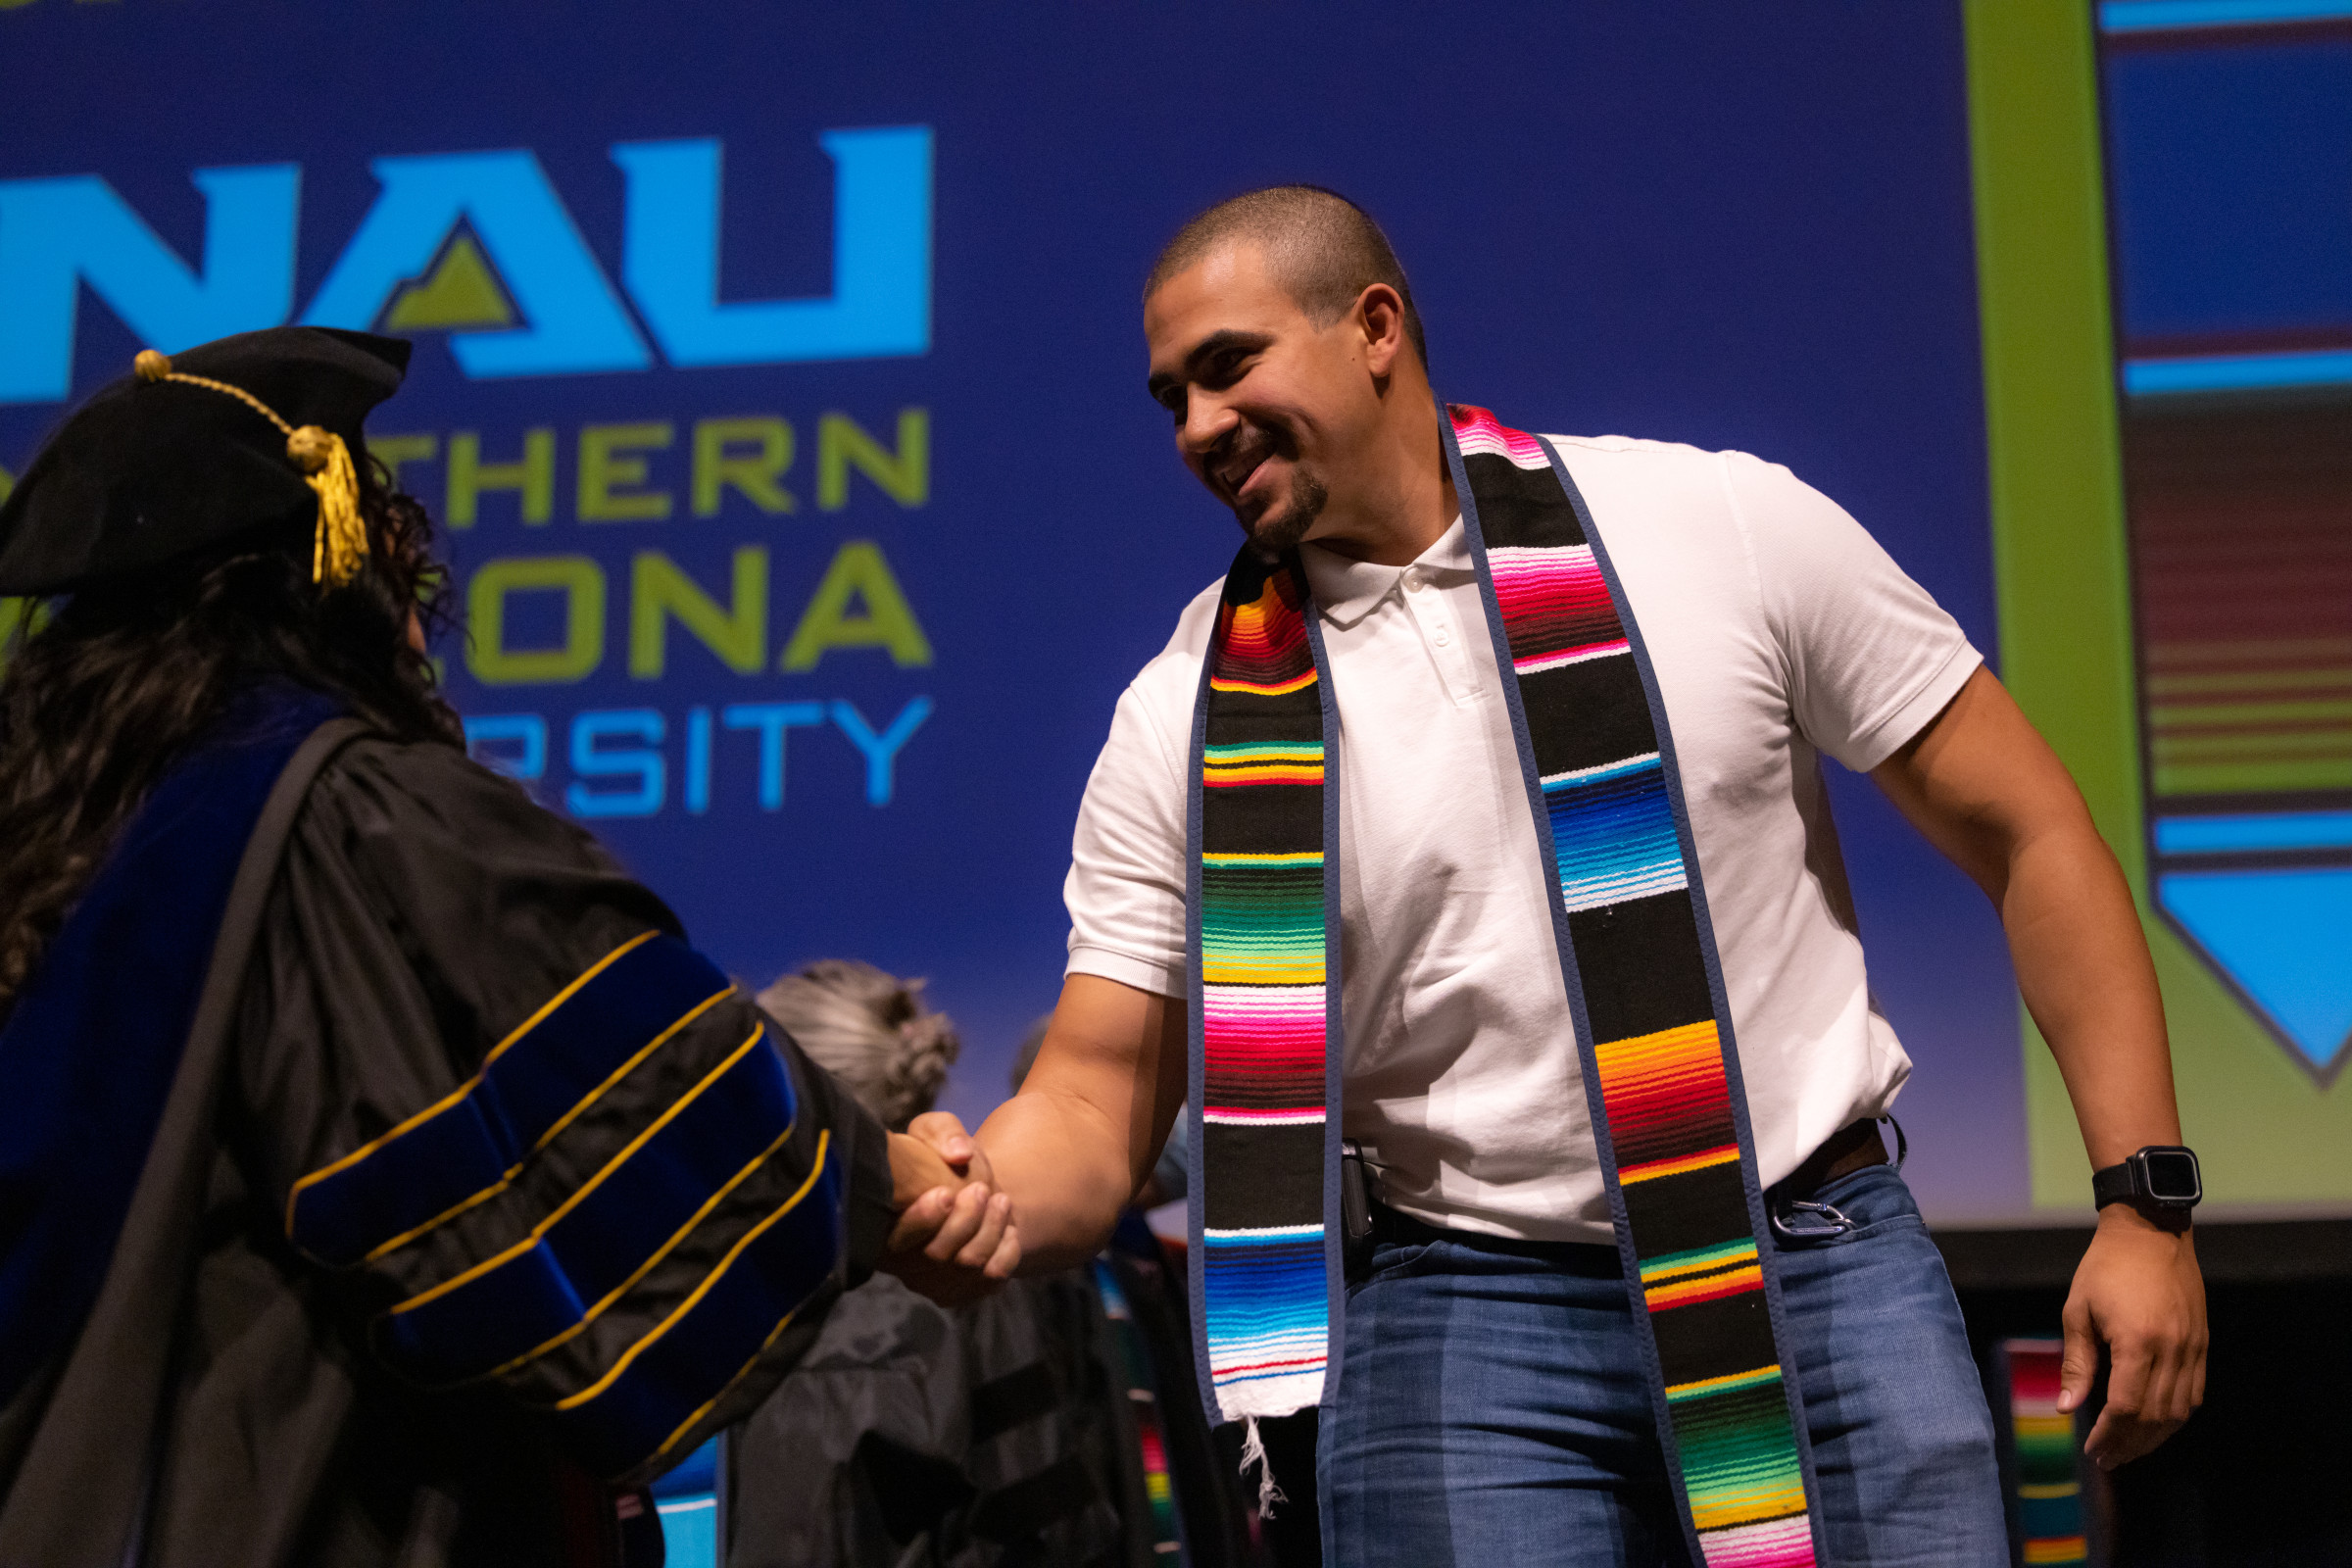 Hispanic student shaking hands at the convocation ceremony.